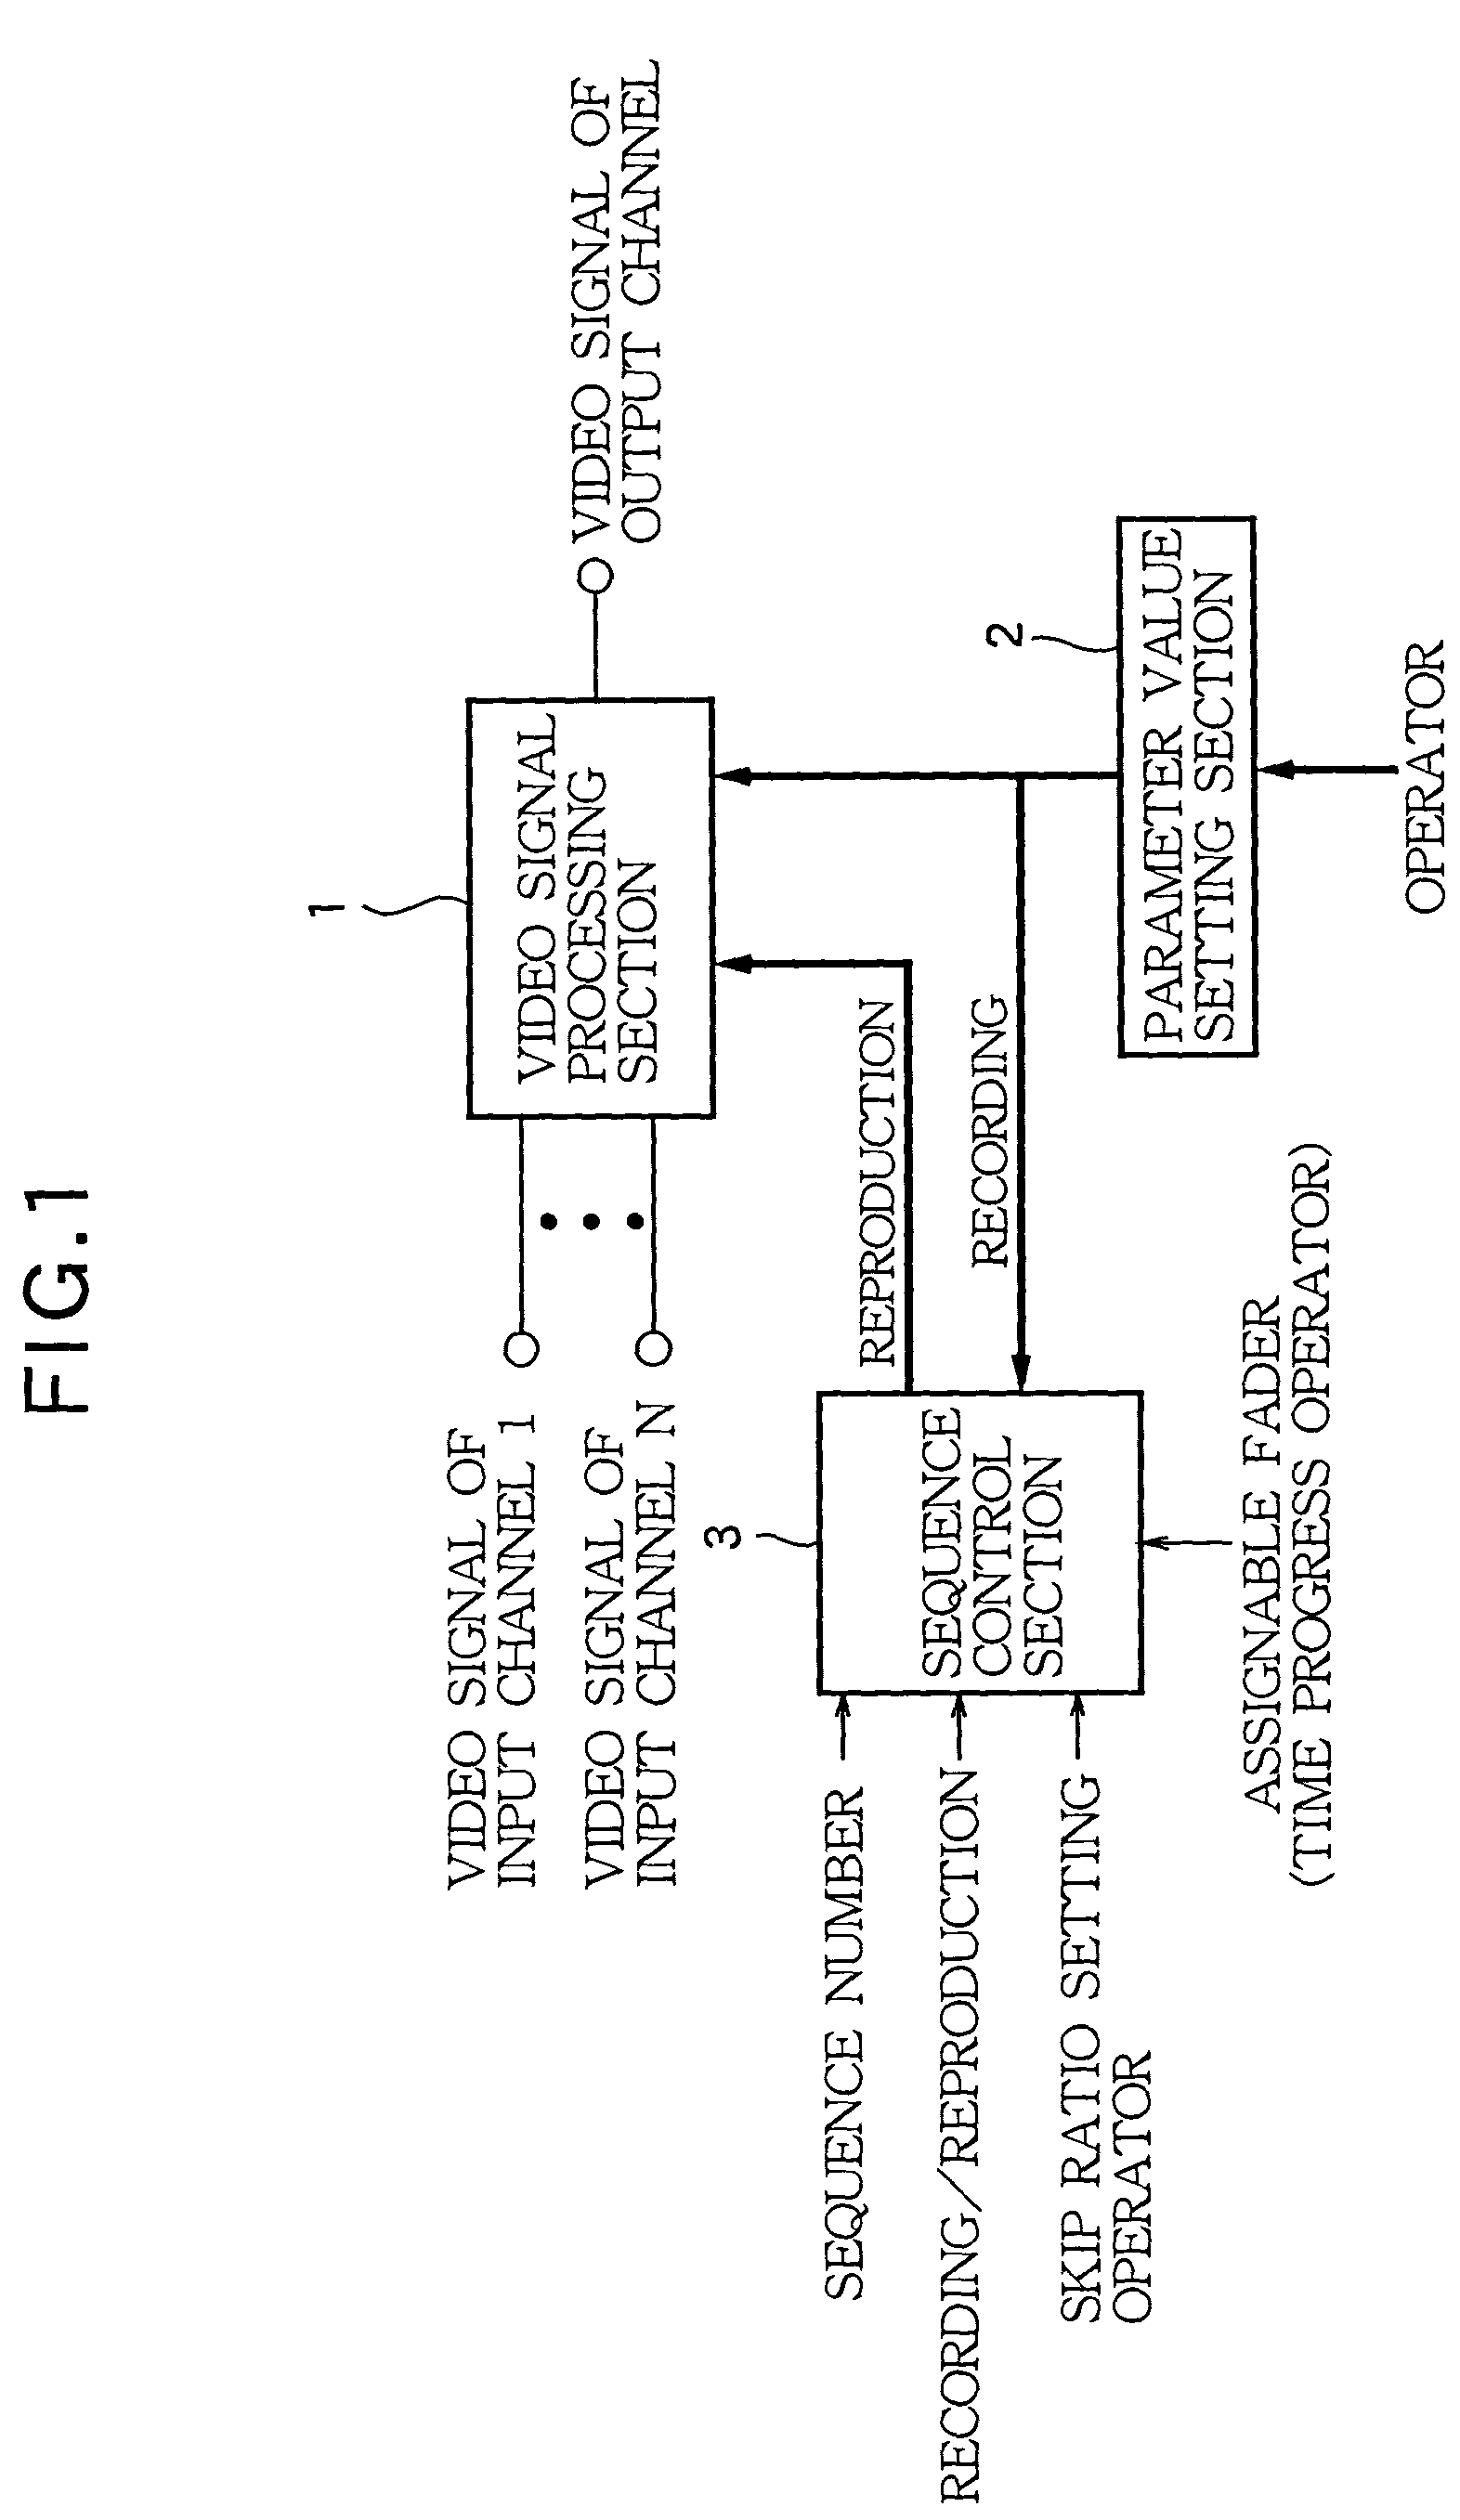 Multi-channel video mixer for applying visual effects to video signals